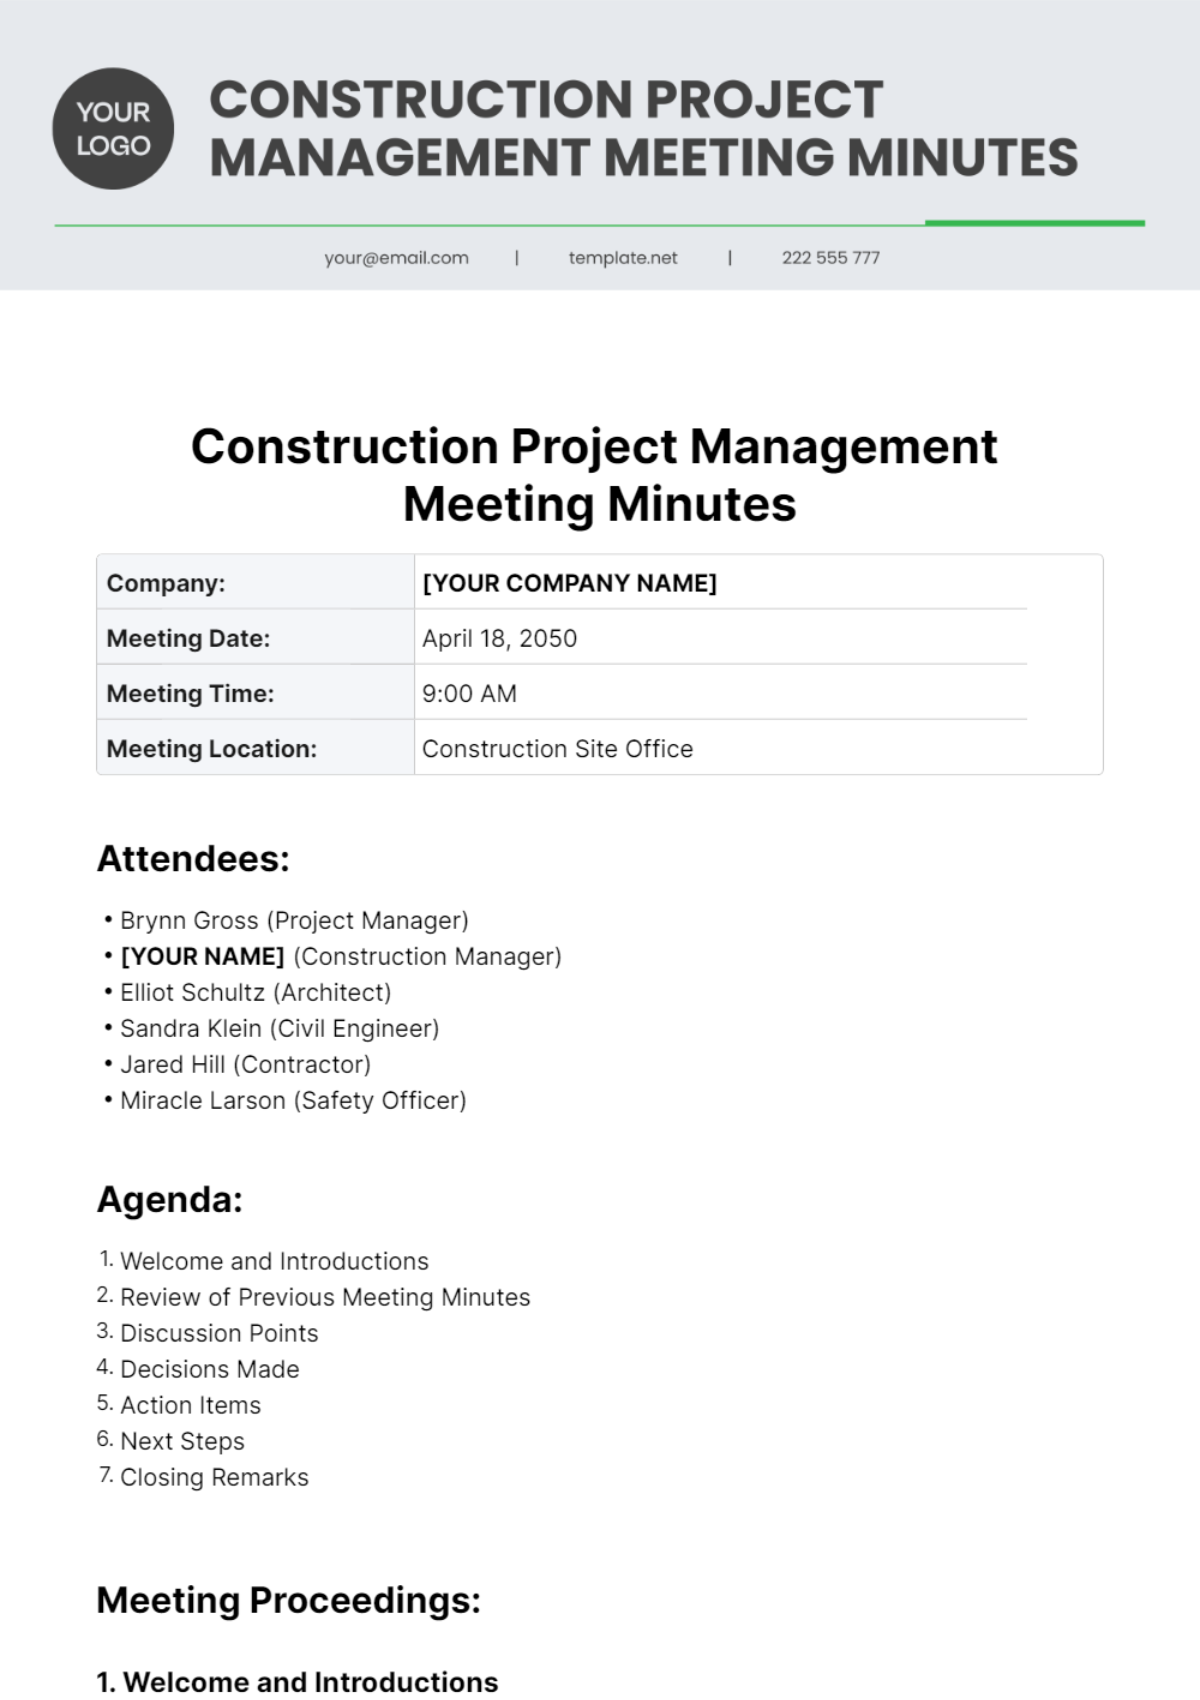 Construction Project Management Meeting Minutes Template